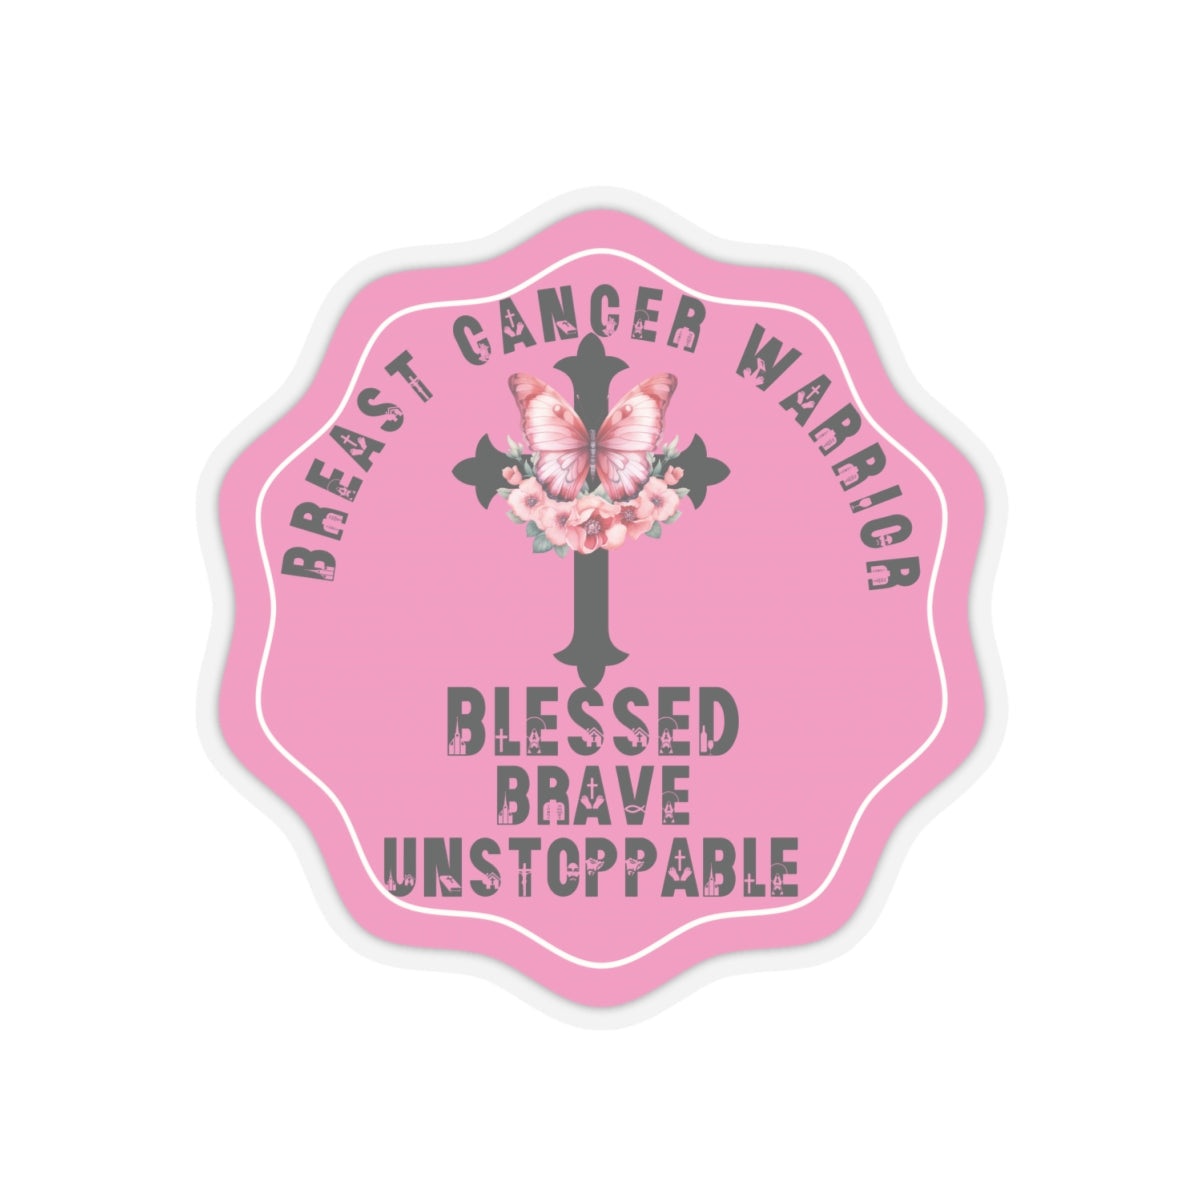 Blessed Breast Cancer Warrior Motivational Quote Kiss-Cut Stickers-Paper products-4" × 4"-Transparent-mysticalcherry